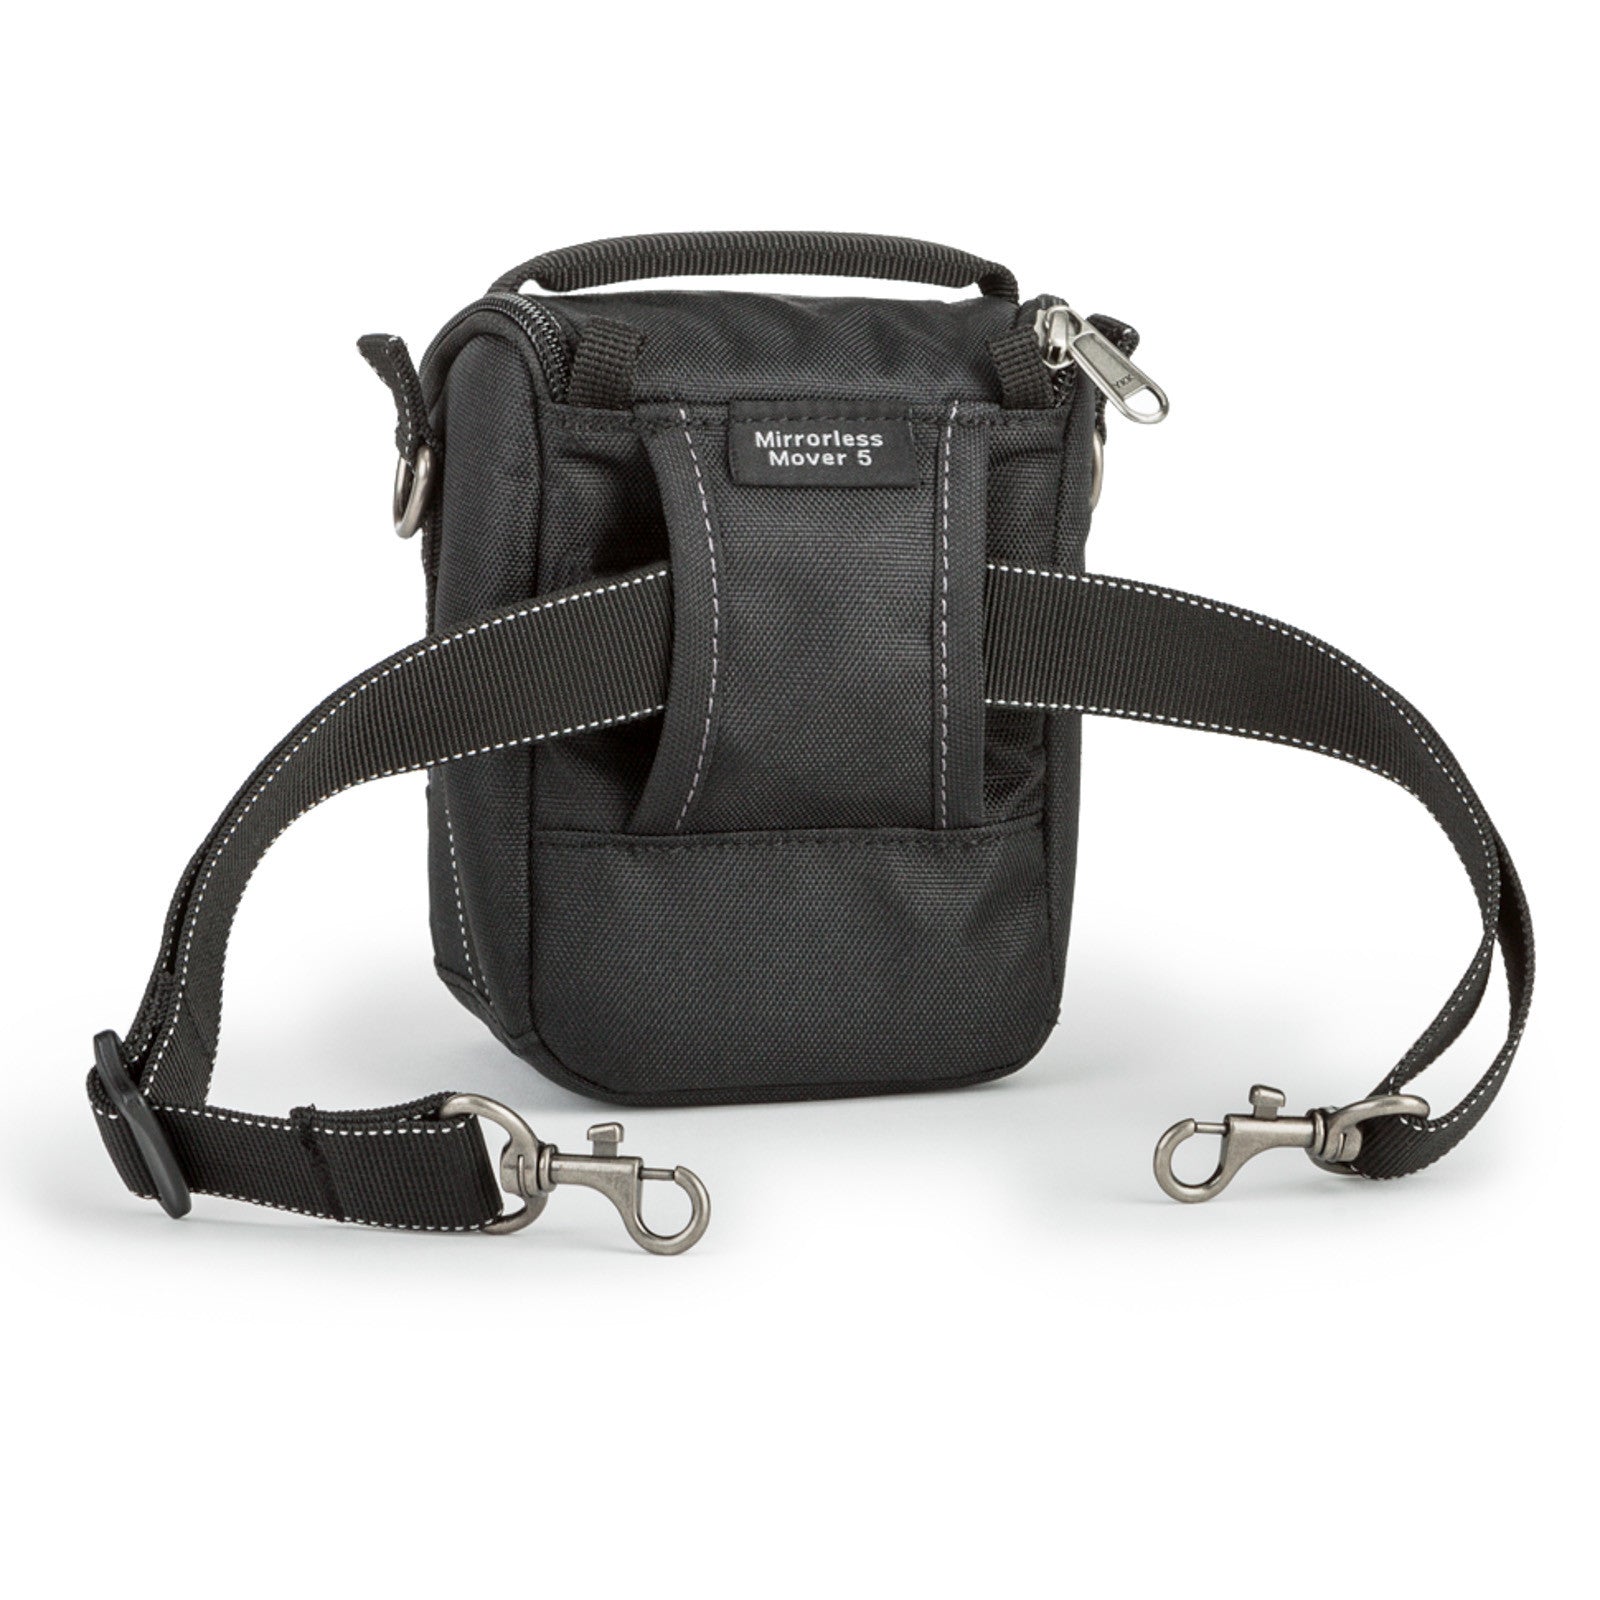 Think Tank Mirrorless Mover 5 Camera Bag (Charcoal), bags shoulder bags, Think Tank Photo - Pictureline  - 3